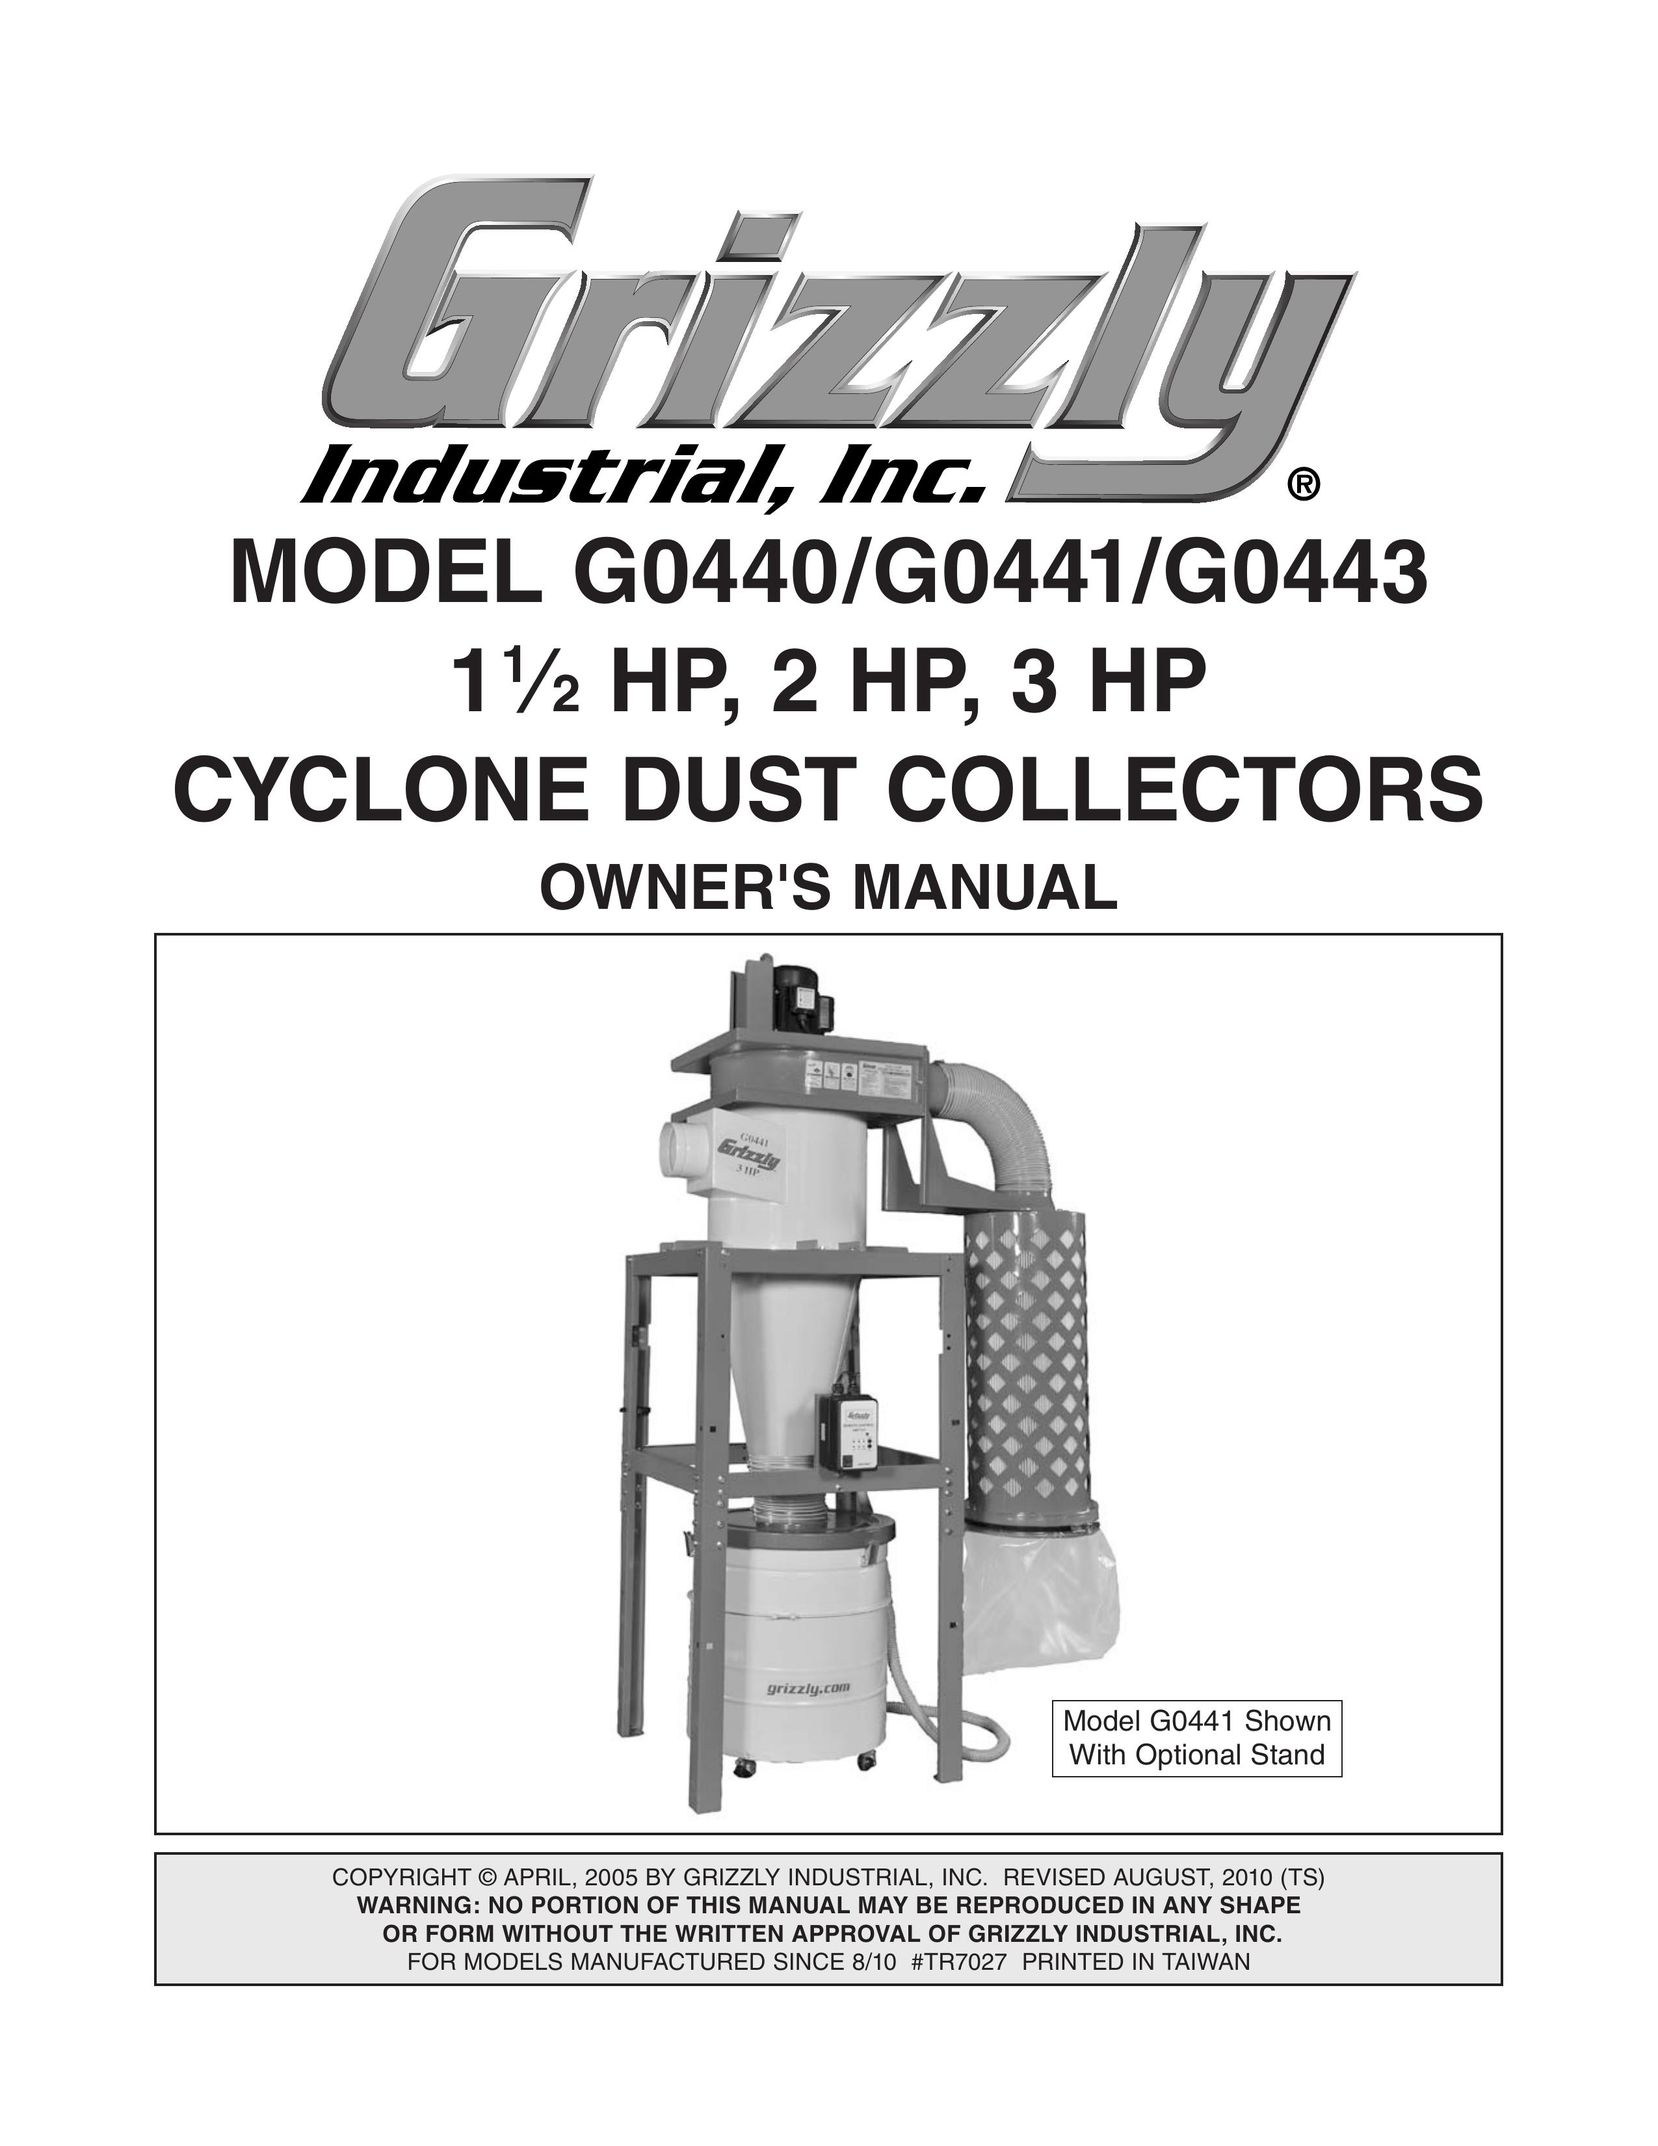 Grizzly G0443 Dust Collector User Manual